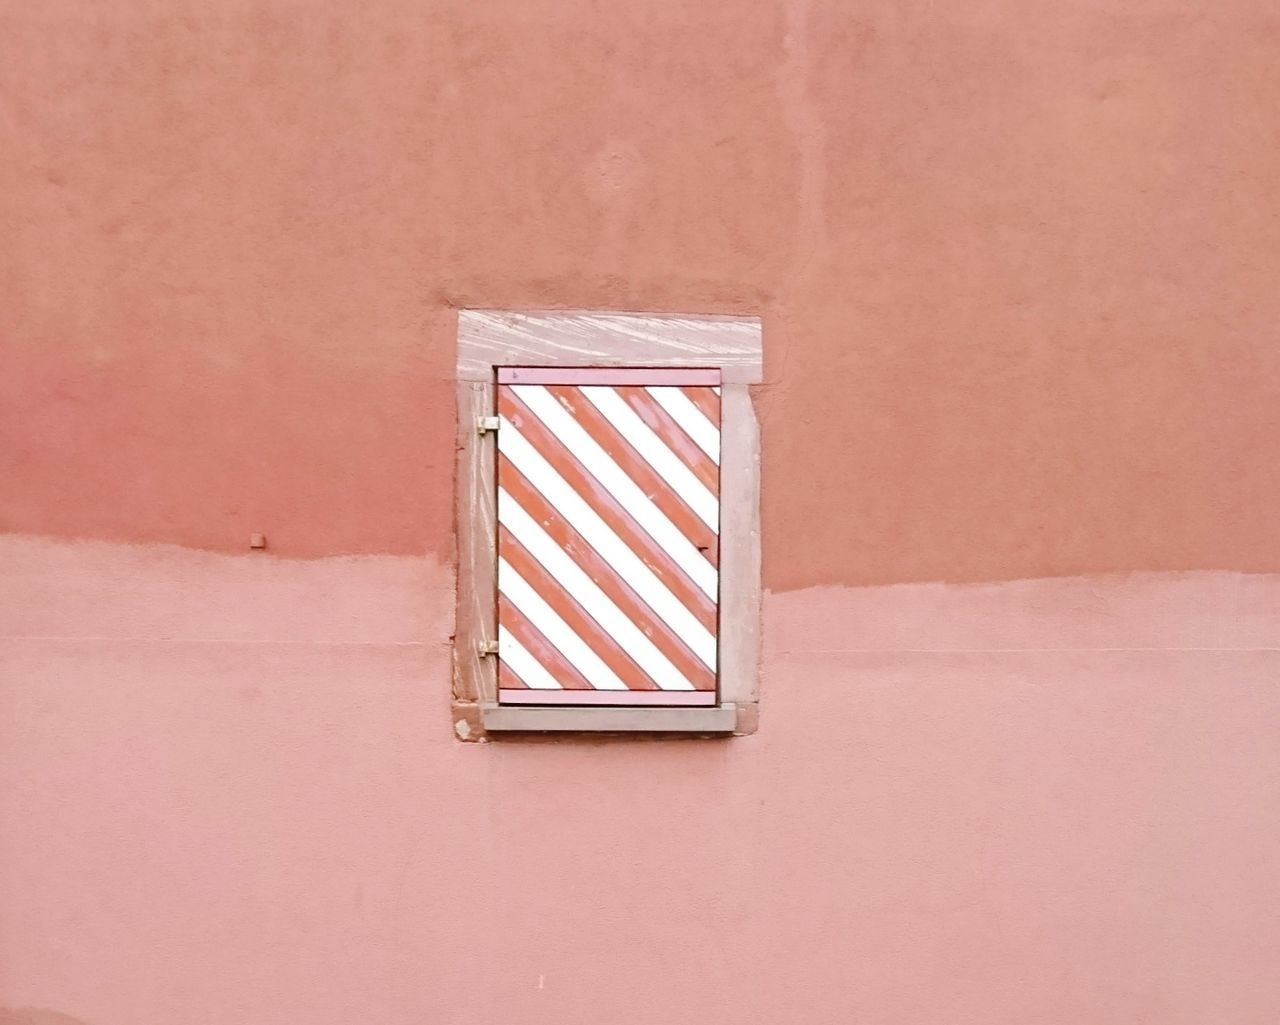 Closed window amidst coral colored wall